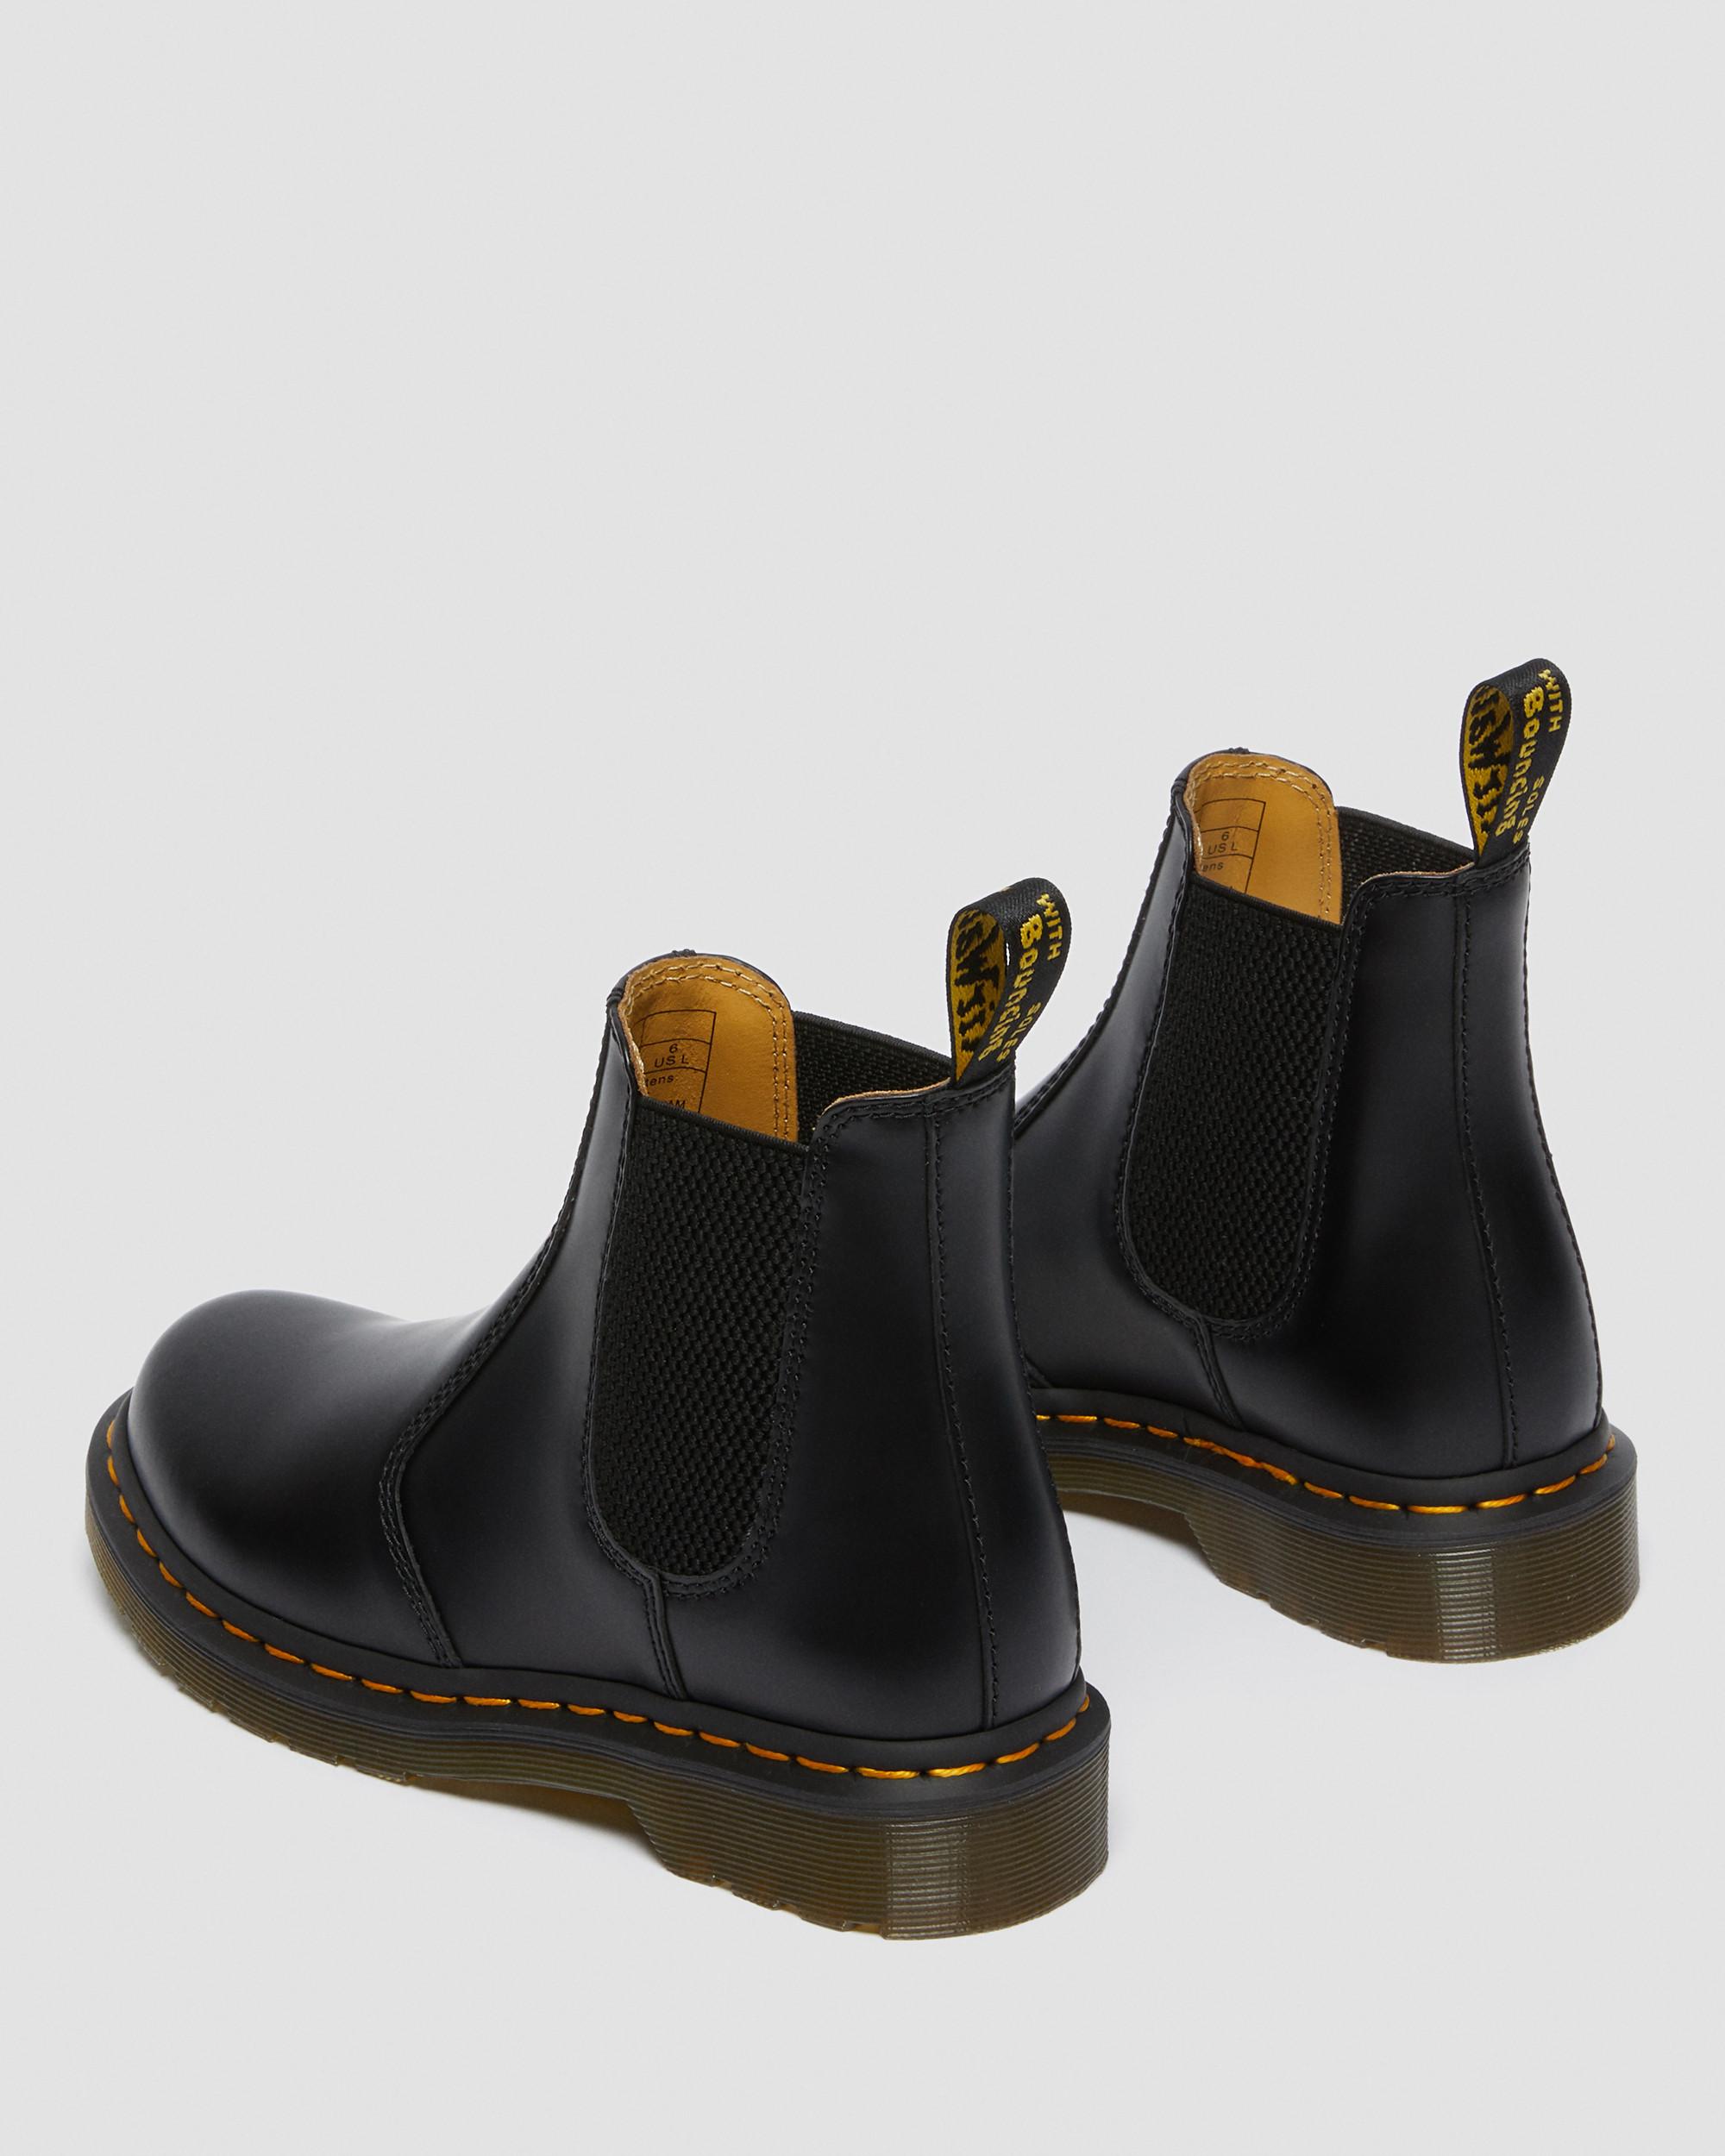 schandaal slepen Draak 2976 Women's Smooth Leather Chelsea Boots | Dr. Martens